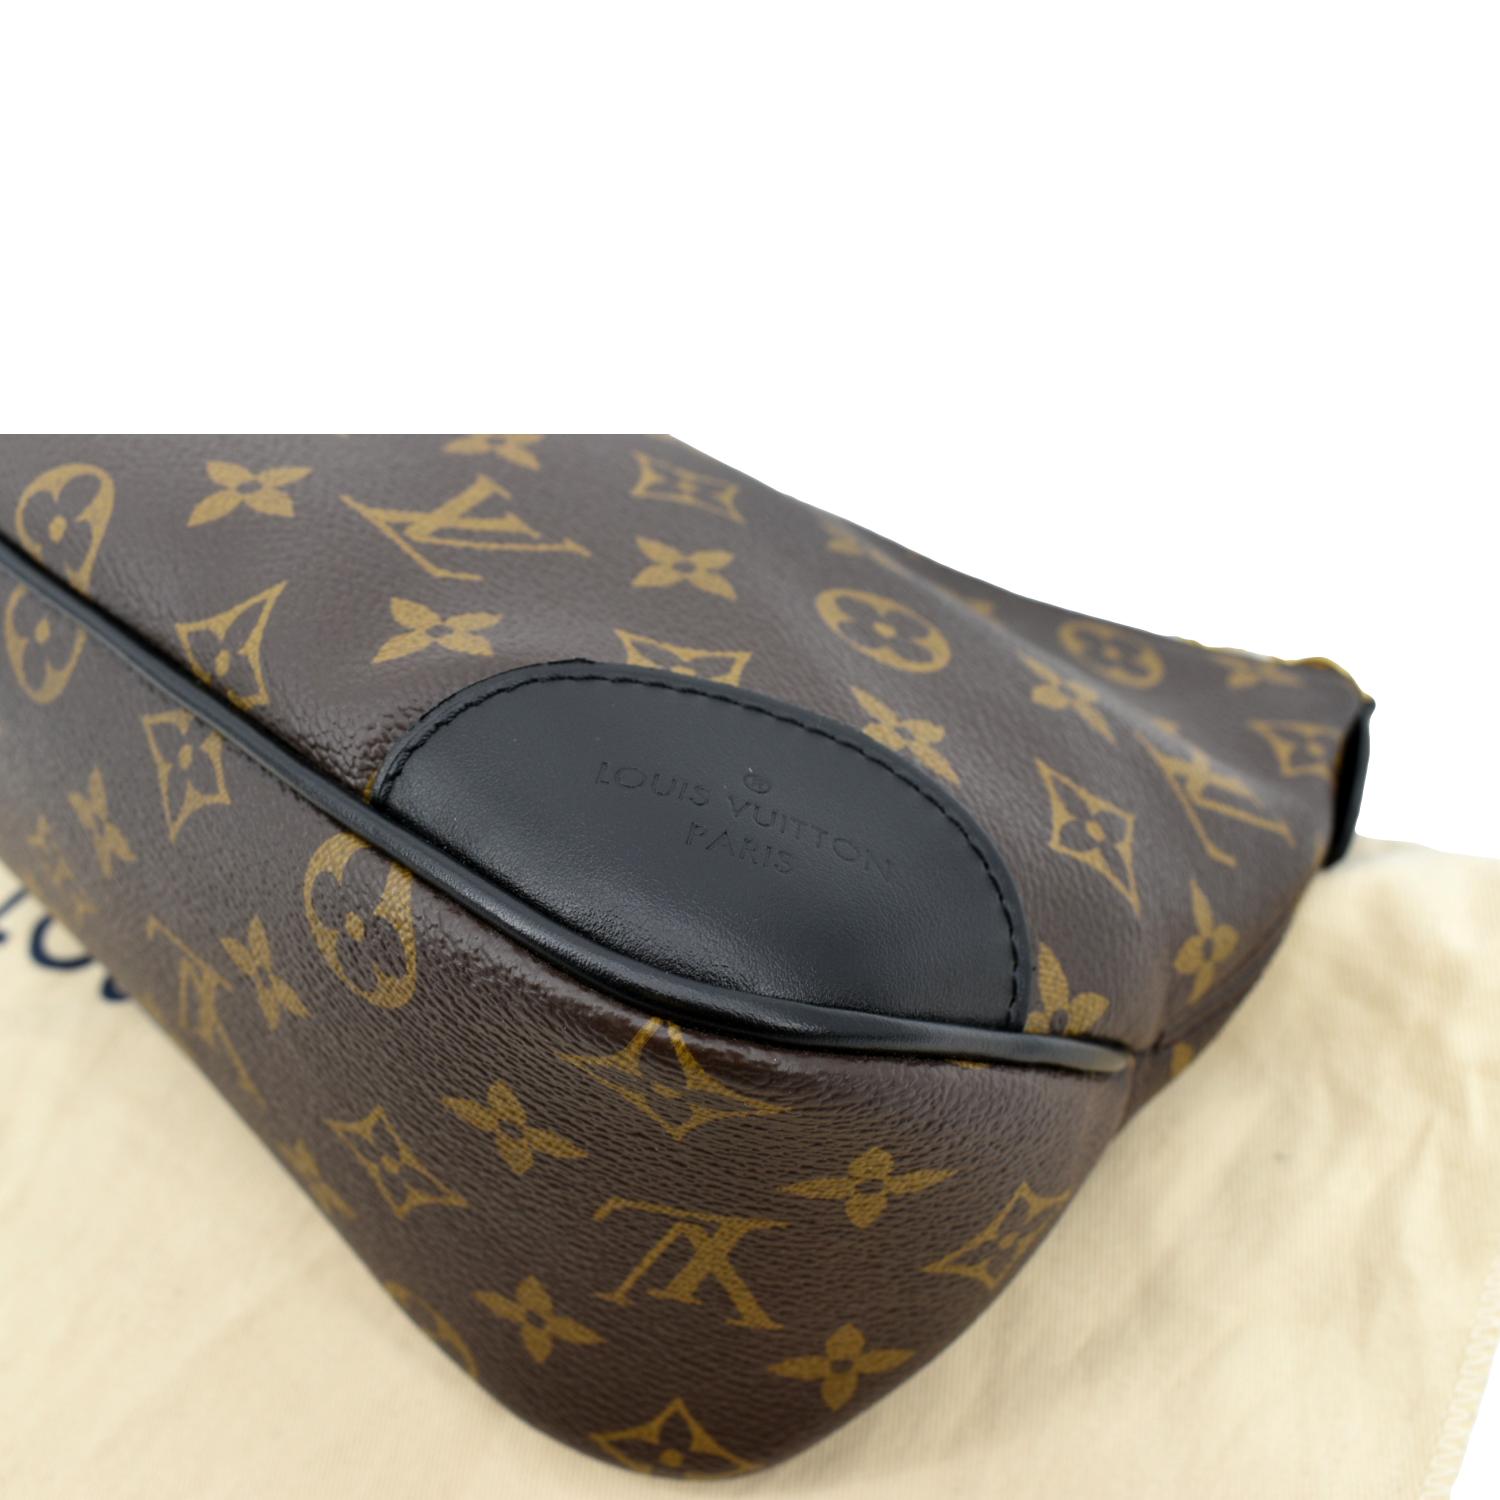 Boulogne leather handbag Louis Vuitton Brown in Leather - 28100879